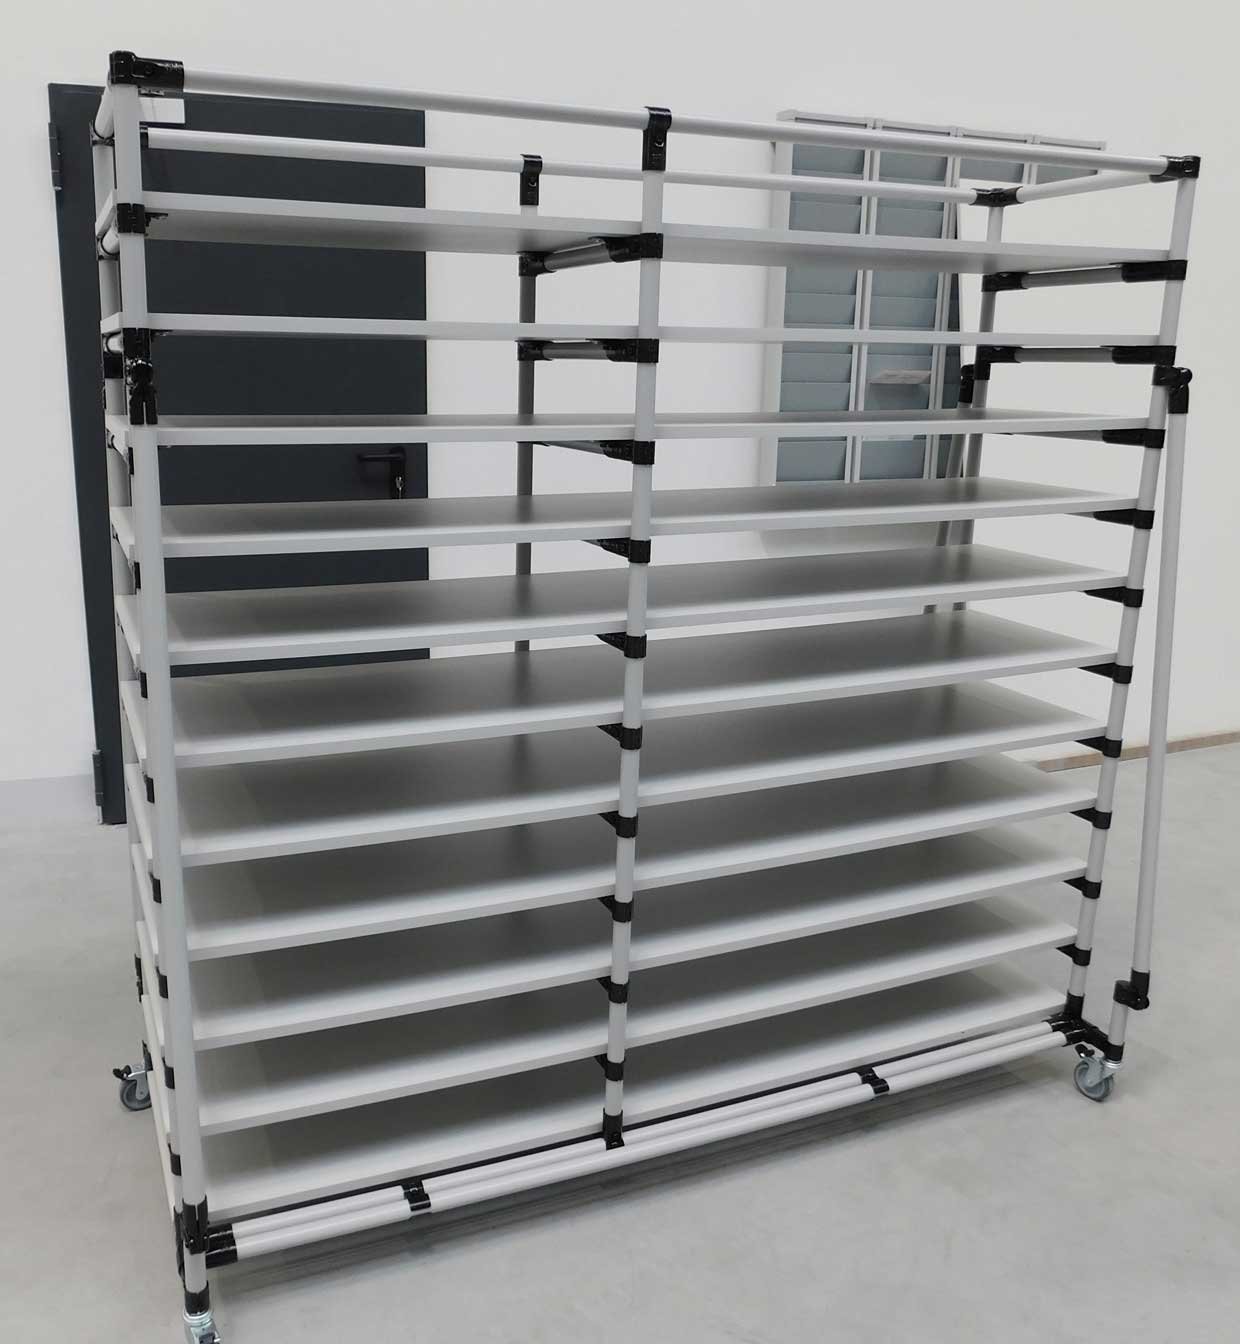 Compact storage rack with stable shelves